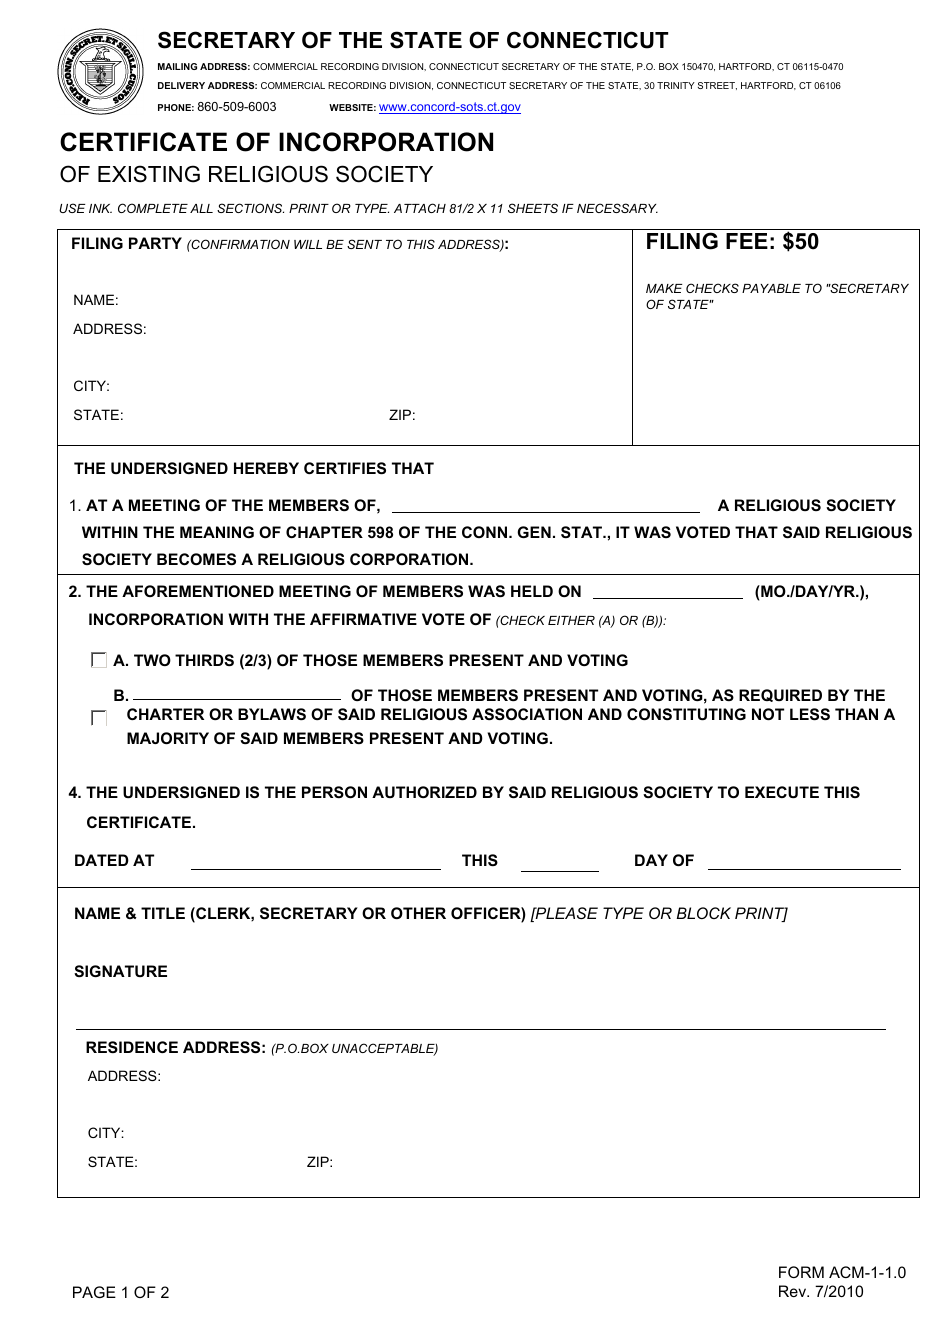 Form ACM-1-1.0 Certificate of Incorporation - Connecticut, Page 1